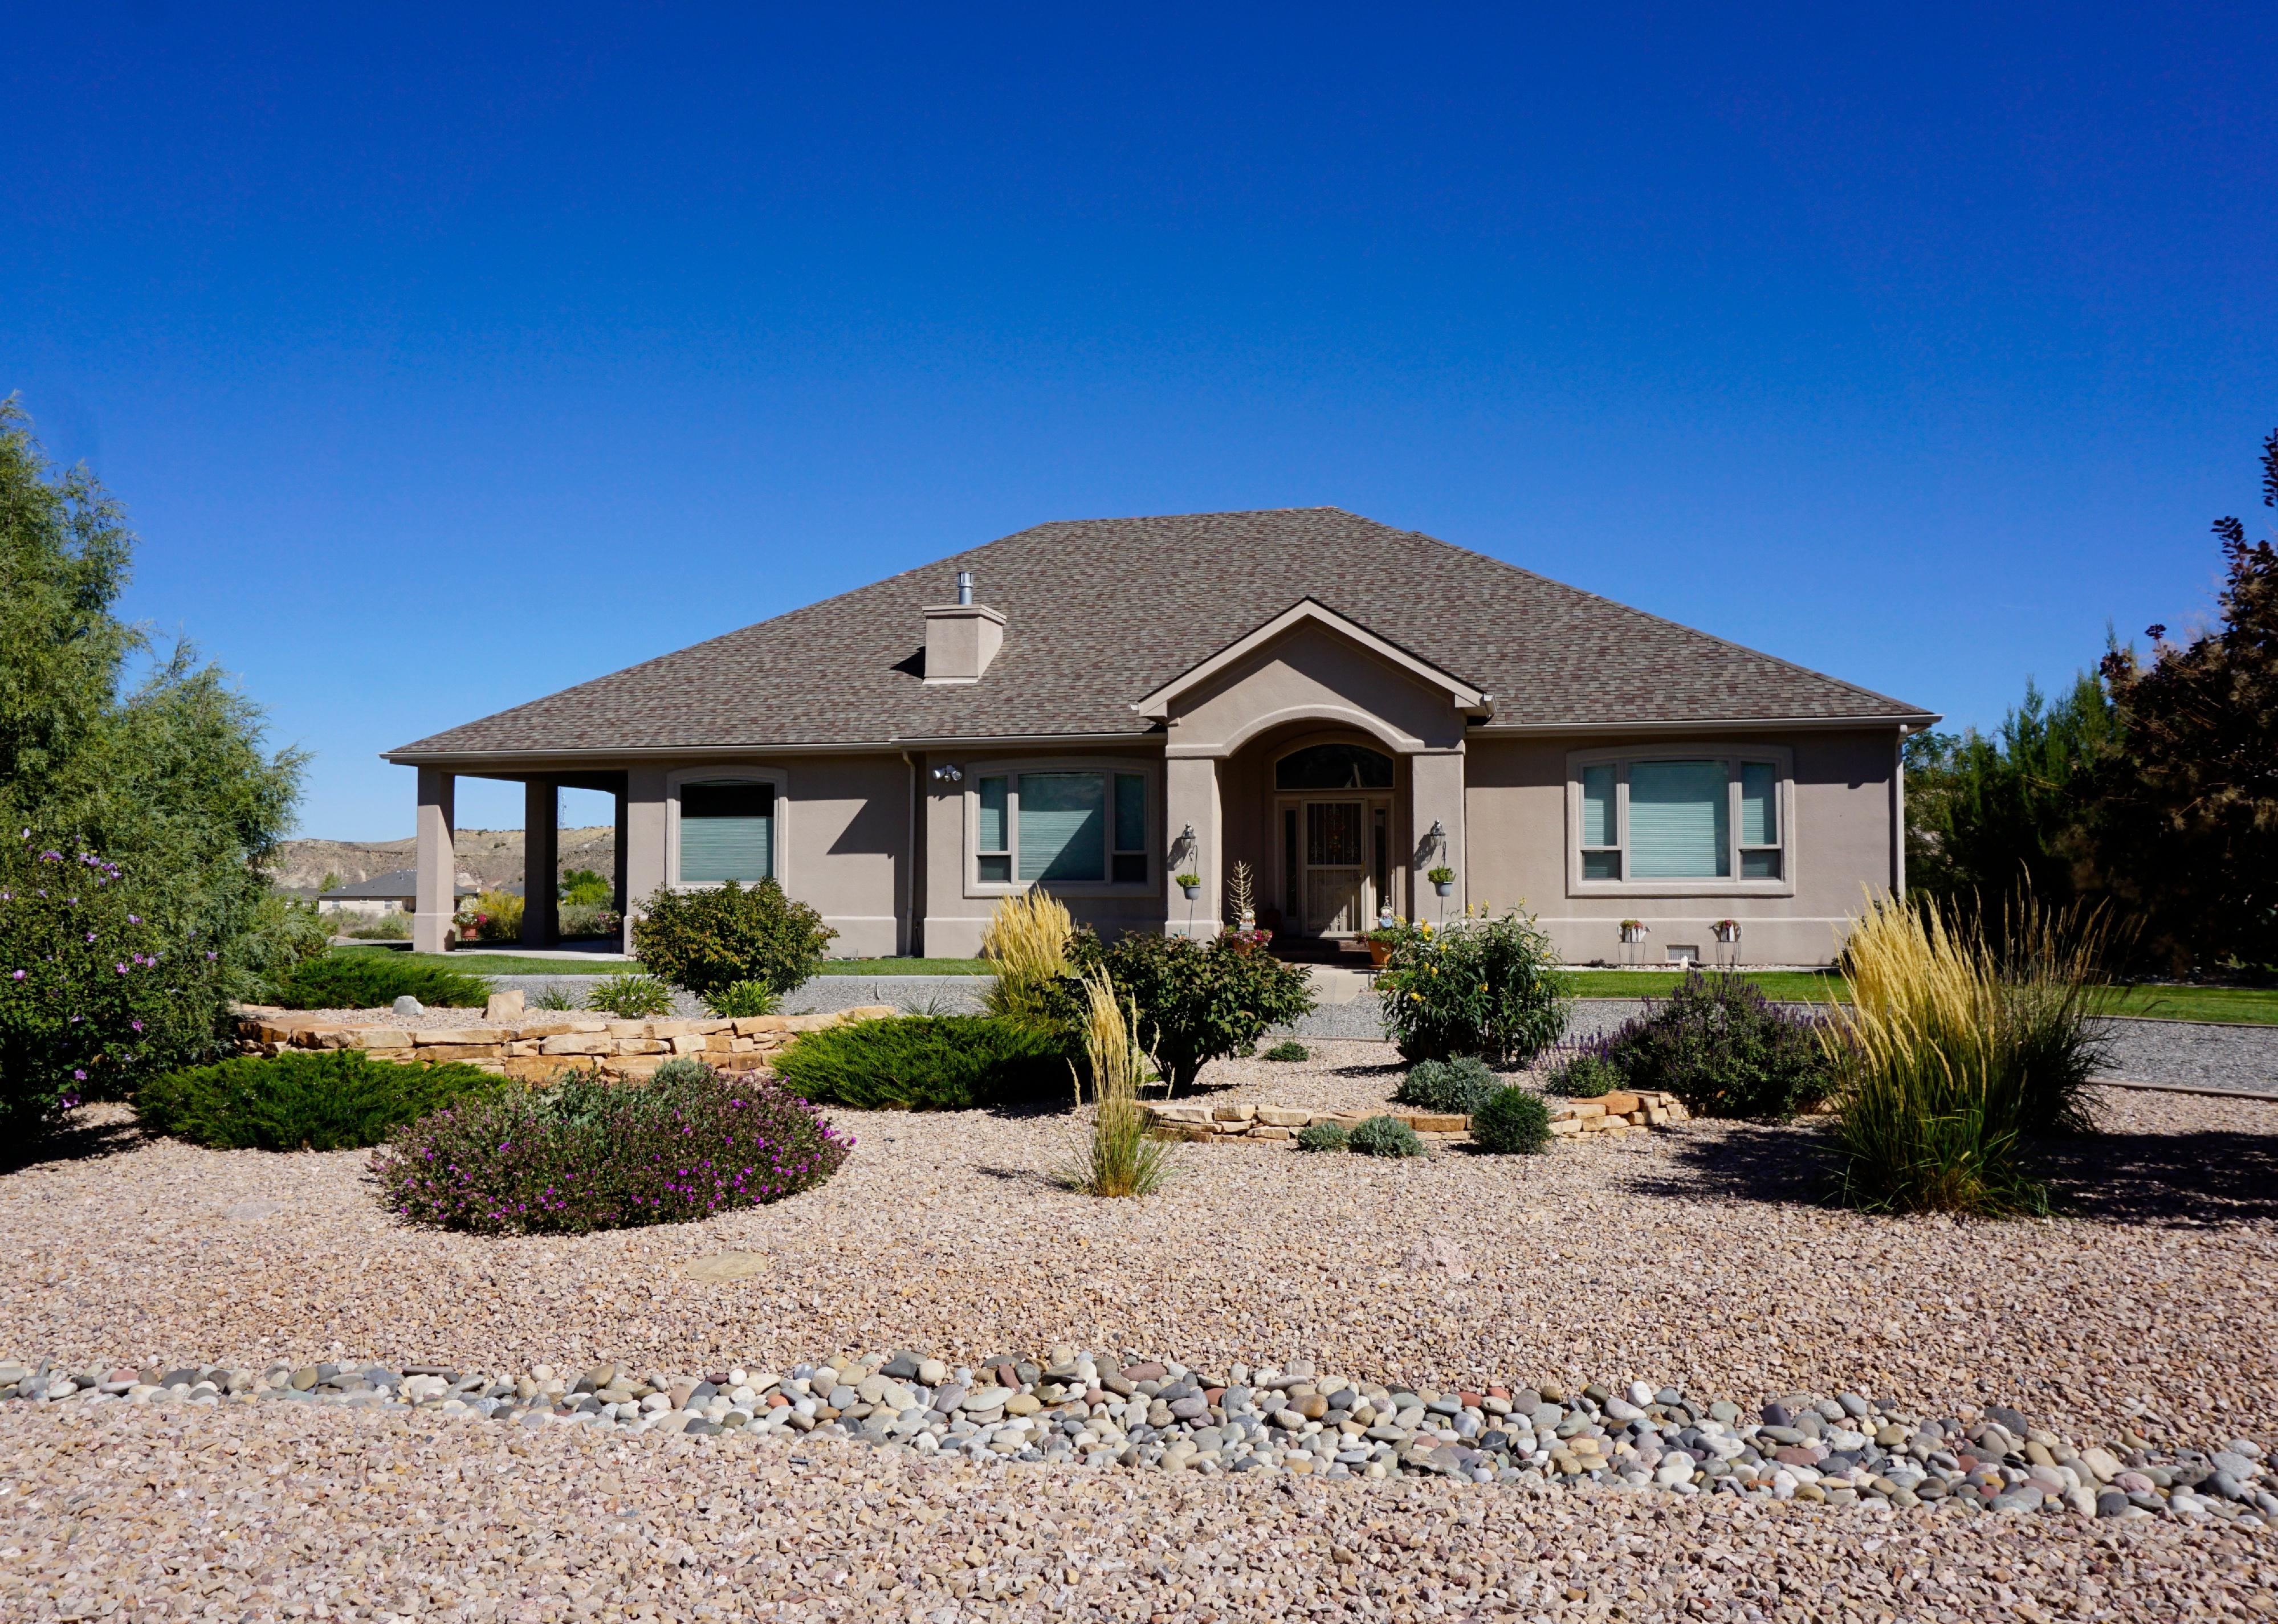 Suburban house in Colorado neighborhood with xeriscape landscaping.